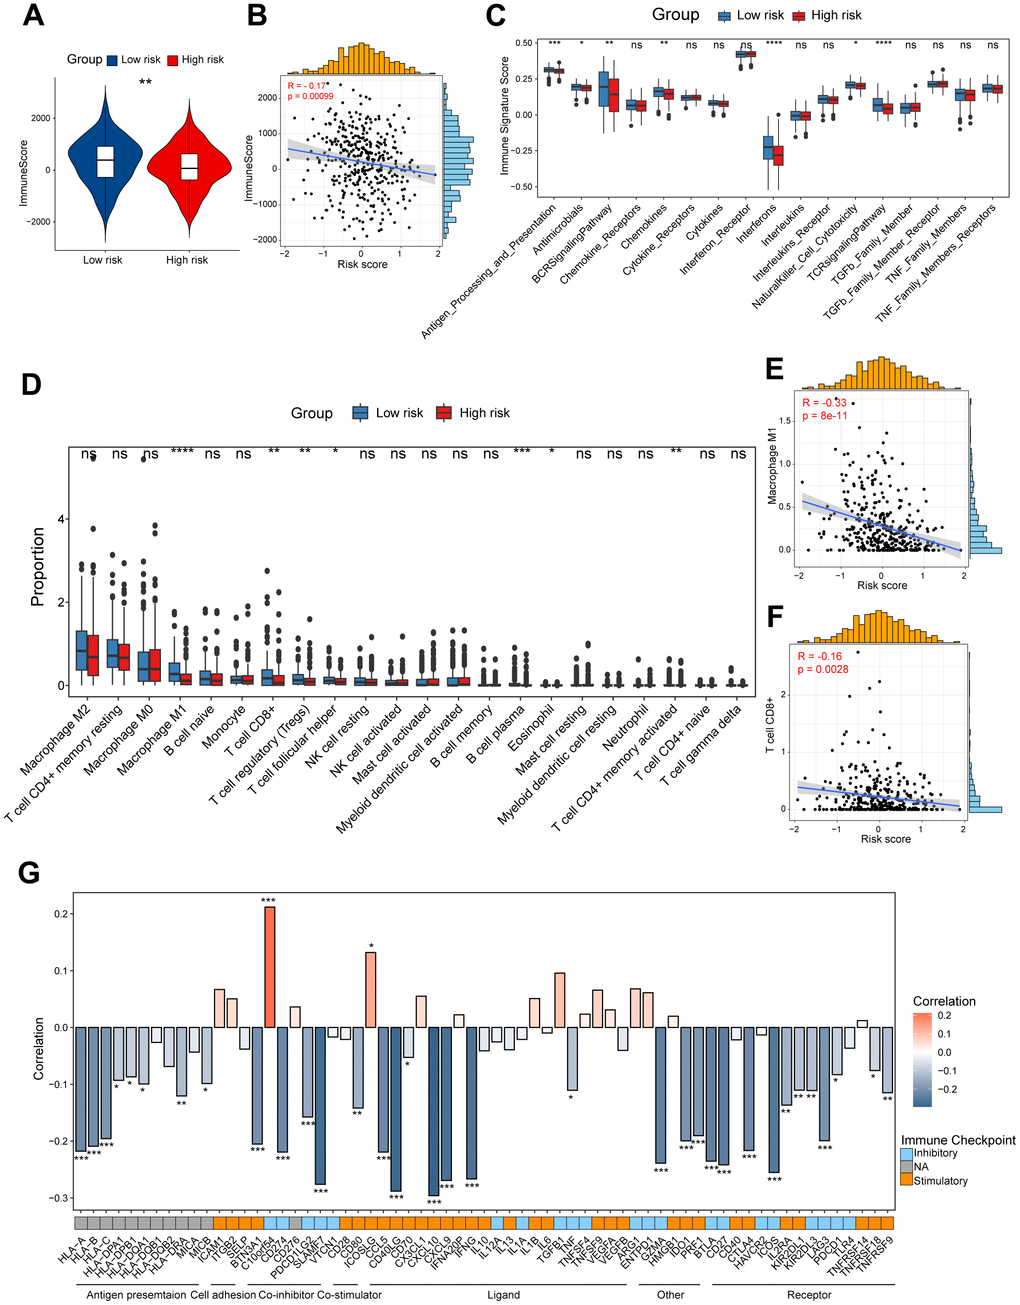 Dissection of tumor immune microenvironment features based on CD8+ T cell-related prognostic signature. (A) Immune score in high/low-risk groups. (B) Spearman correlation between Immune score and risk score. (C) Boxplots showing the signature score of 17 immune pathways in high/low-risk groups of ovarian cancer scored by GSVA. Paired two-sided Wilcoxon test. (D) Boxplots showing the proportion of 22 immune cells in high/low-risk groups of ovarian cancer estimated by CIBERSORT. Paired two-sided Wilcoxon test. (E, F) Scatter plots showing the correlation between the risk score and the proportion of M1-like macrophages and CD8+ T cells (G) Bar plot of the correlation between immunomodulators and the risk score. The asterisks represent the statistical P-value (*p0.05).